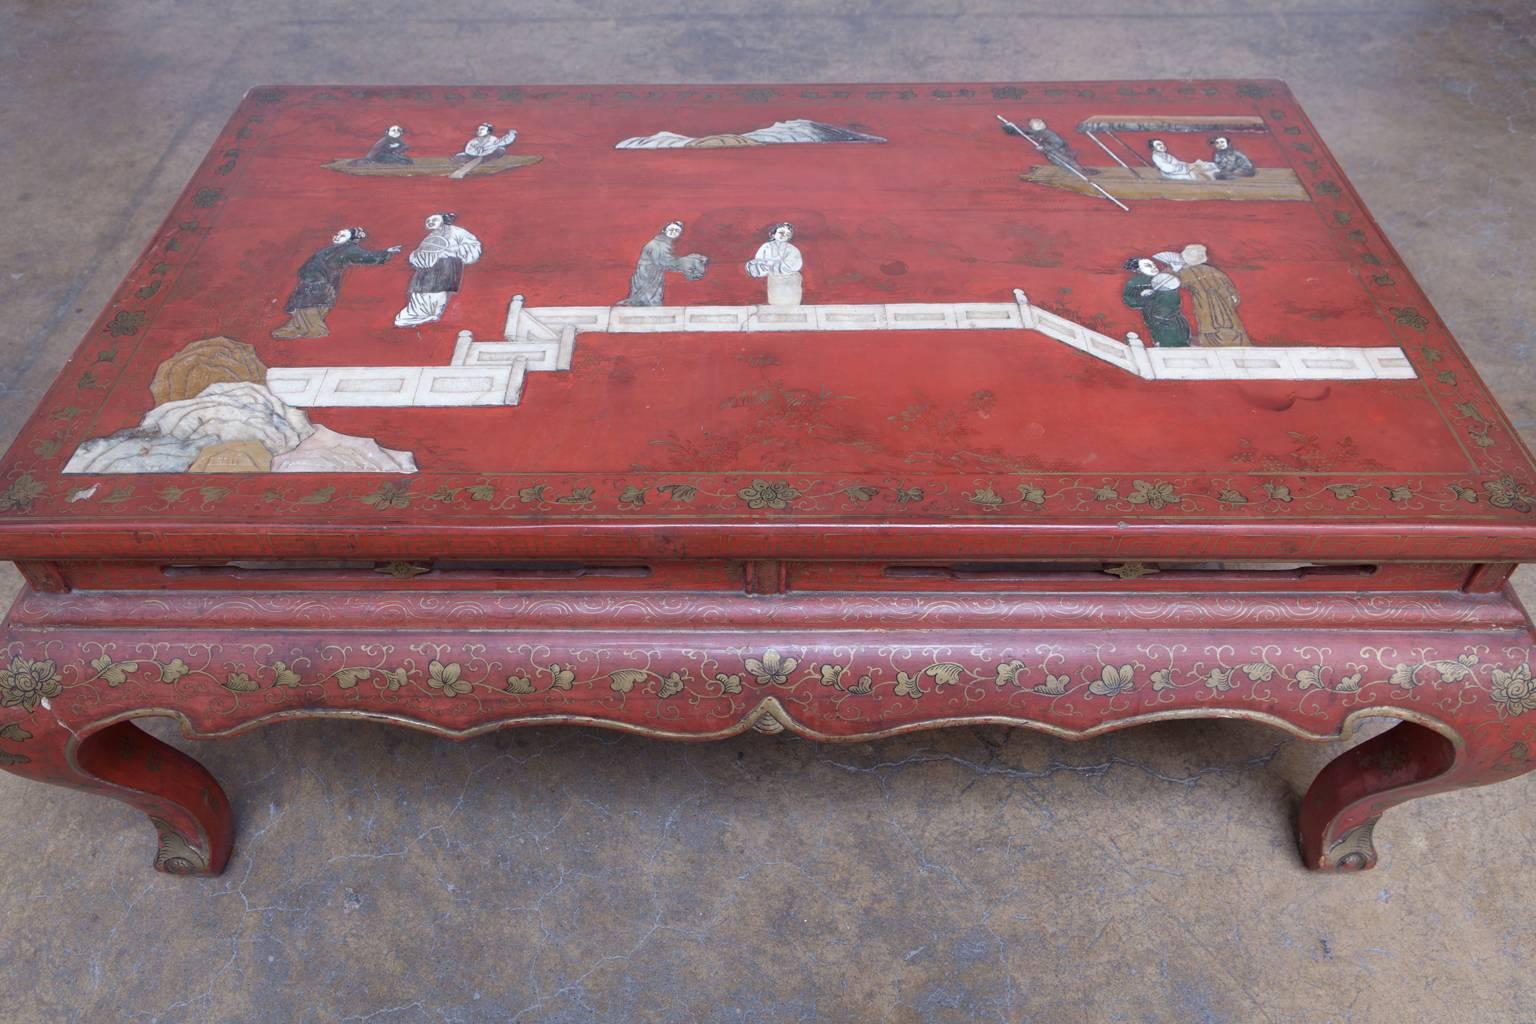 Stunning Chinese coffee table with a red lacquered finish featuring extensive gilt decoration and a carved hard stone top depicting people around a lake. Floating top panel with a pierced serpentine apron supported by cabriole legs. Lovely original